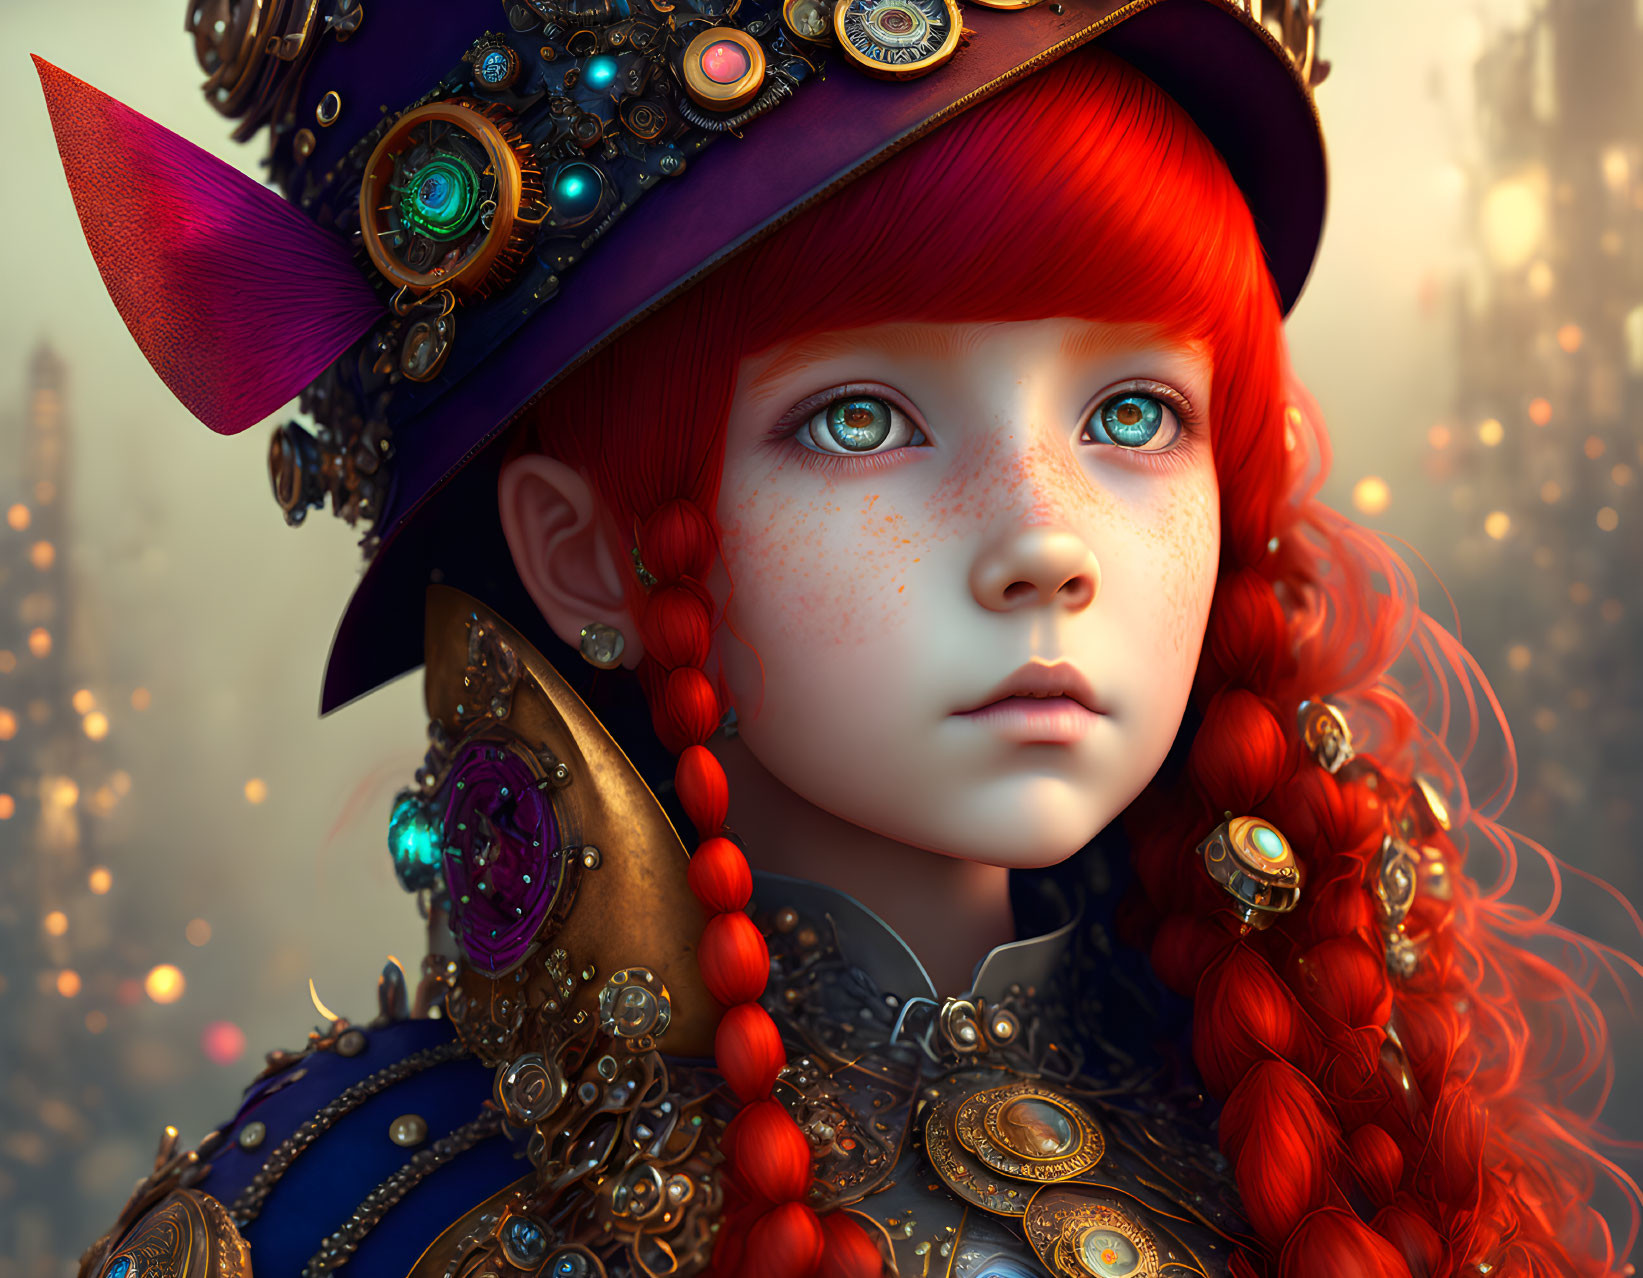 Digital artwork of young girl with red hair in ornate armor and decorated hat